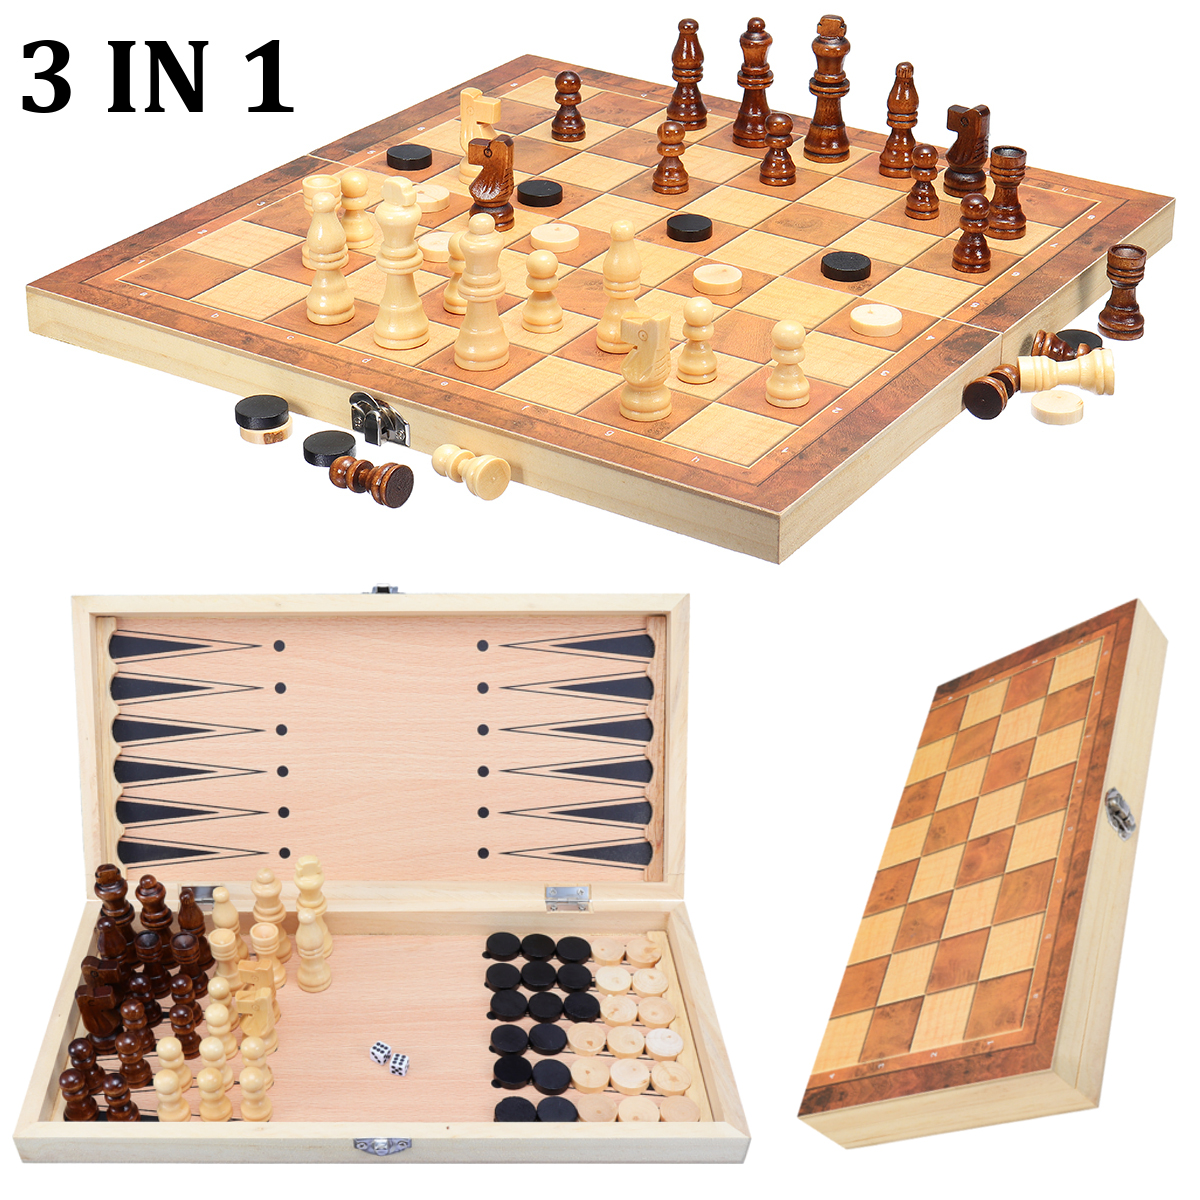 Large Wooden Chess Set Folding Chessboard Pieces Wood Board Kid Gift Toy 3 IN 1 